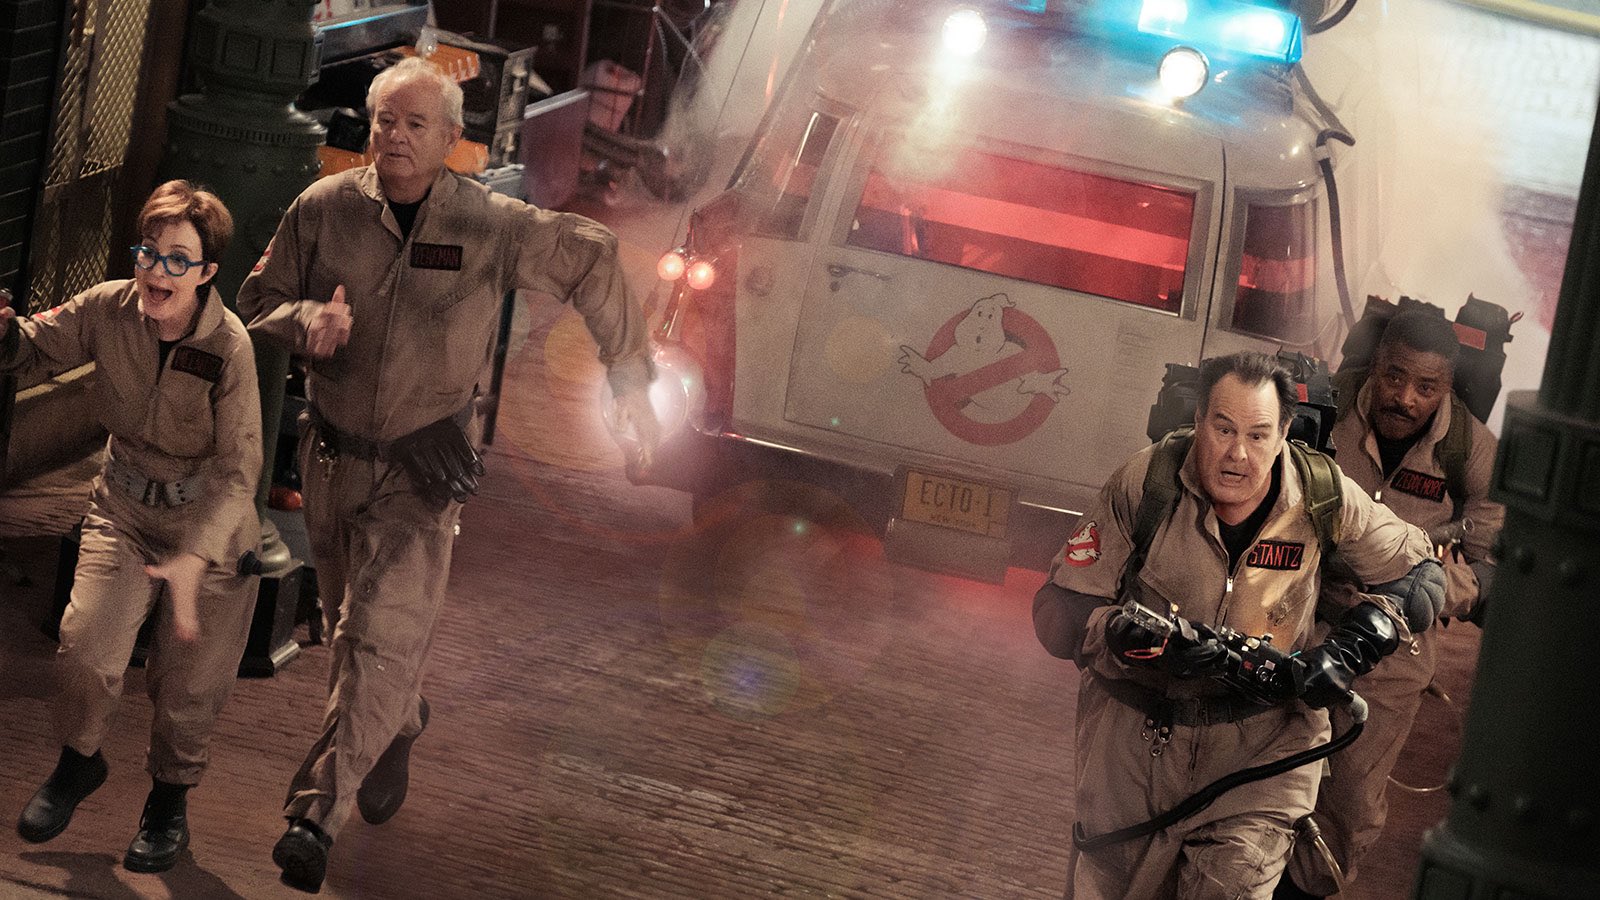 Original Ghostbuster Team's Role in Ghostbusters Frozen Empire Revealed